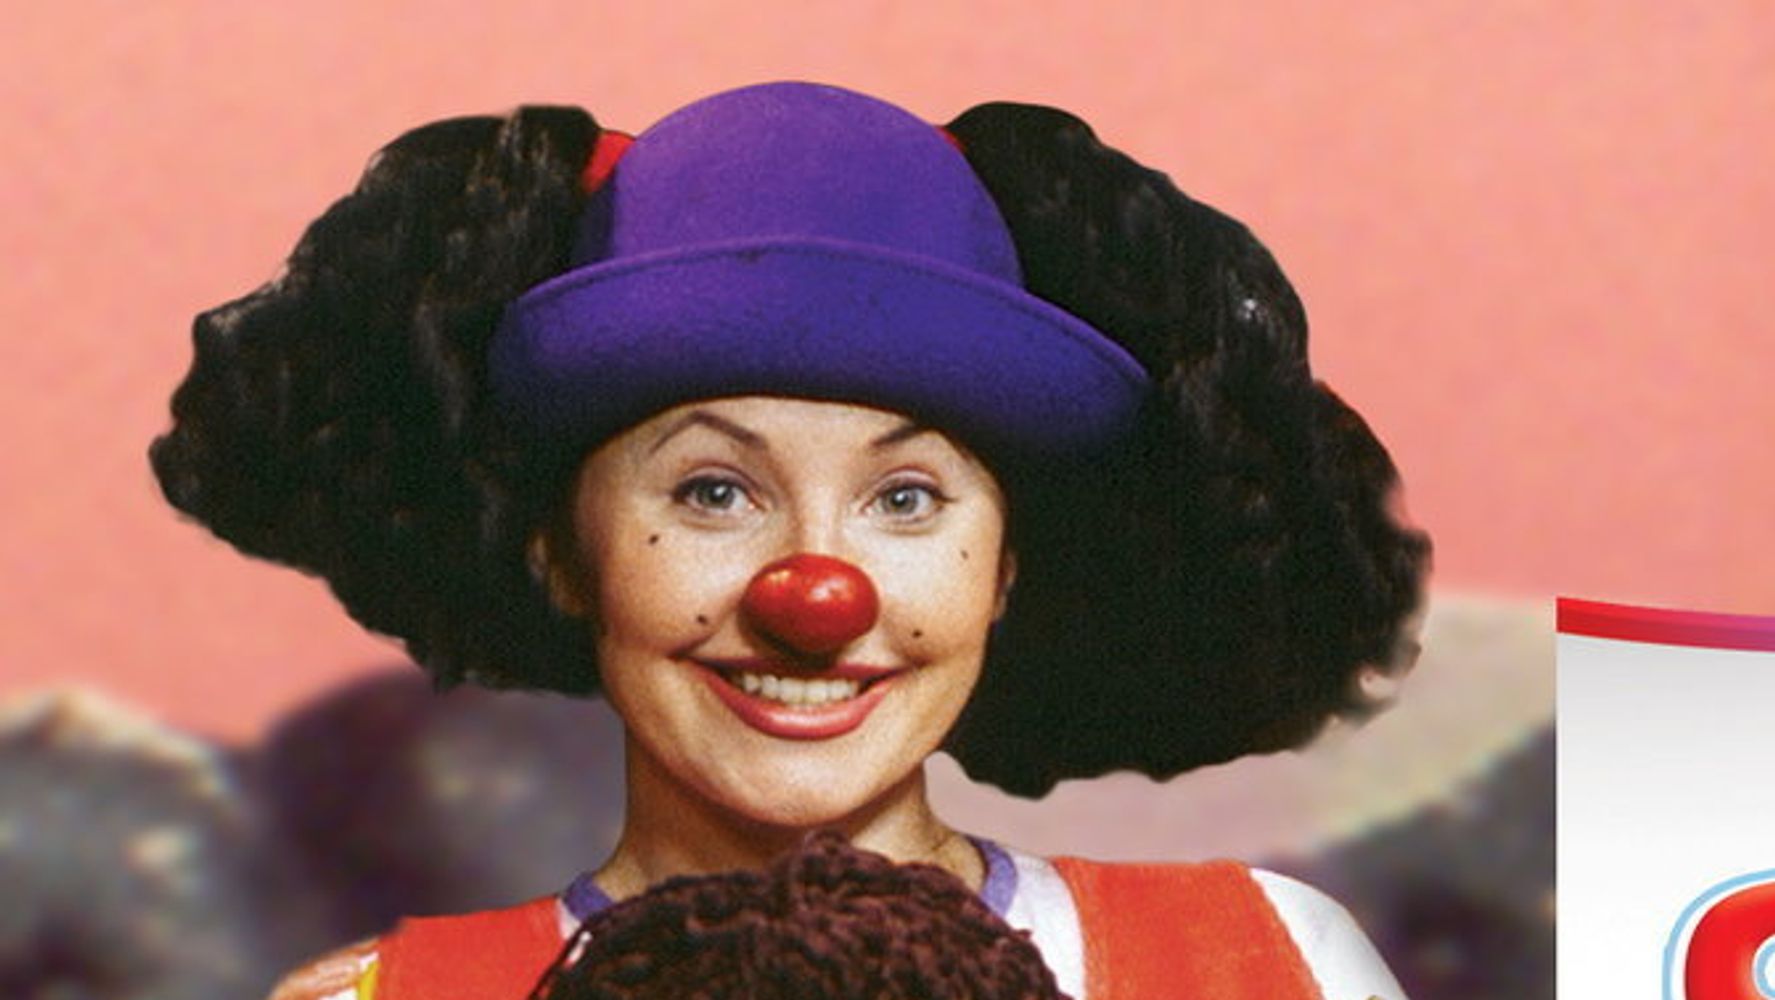 Here's What Loonette The Clown From ‘The Big Comfy Couch’ Looks Like N...